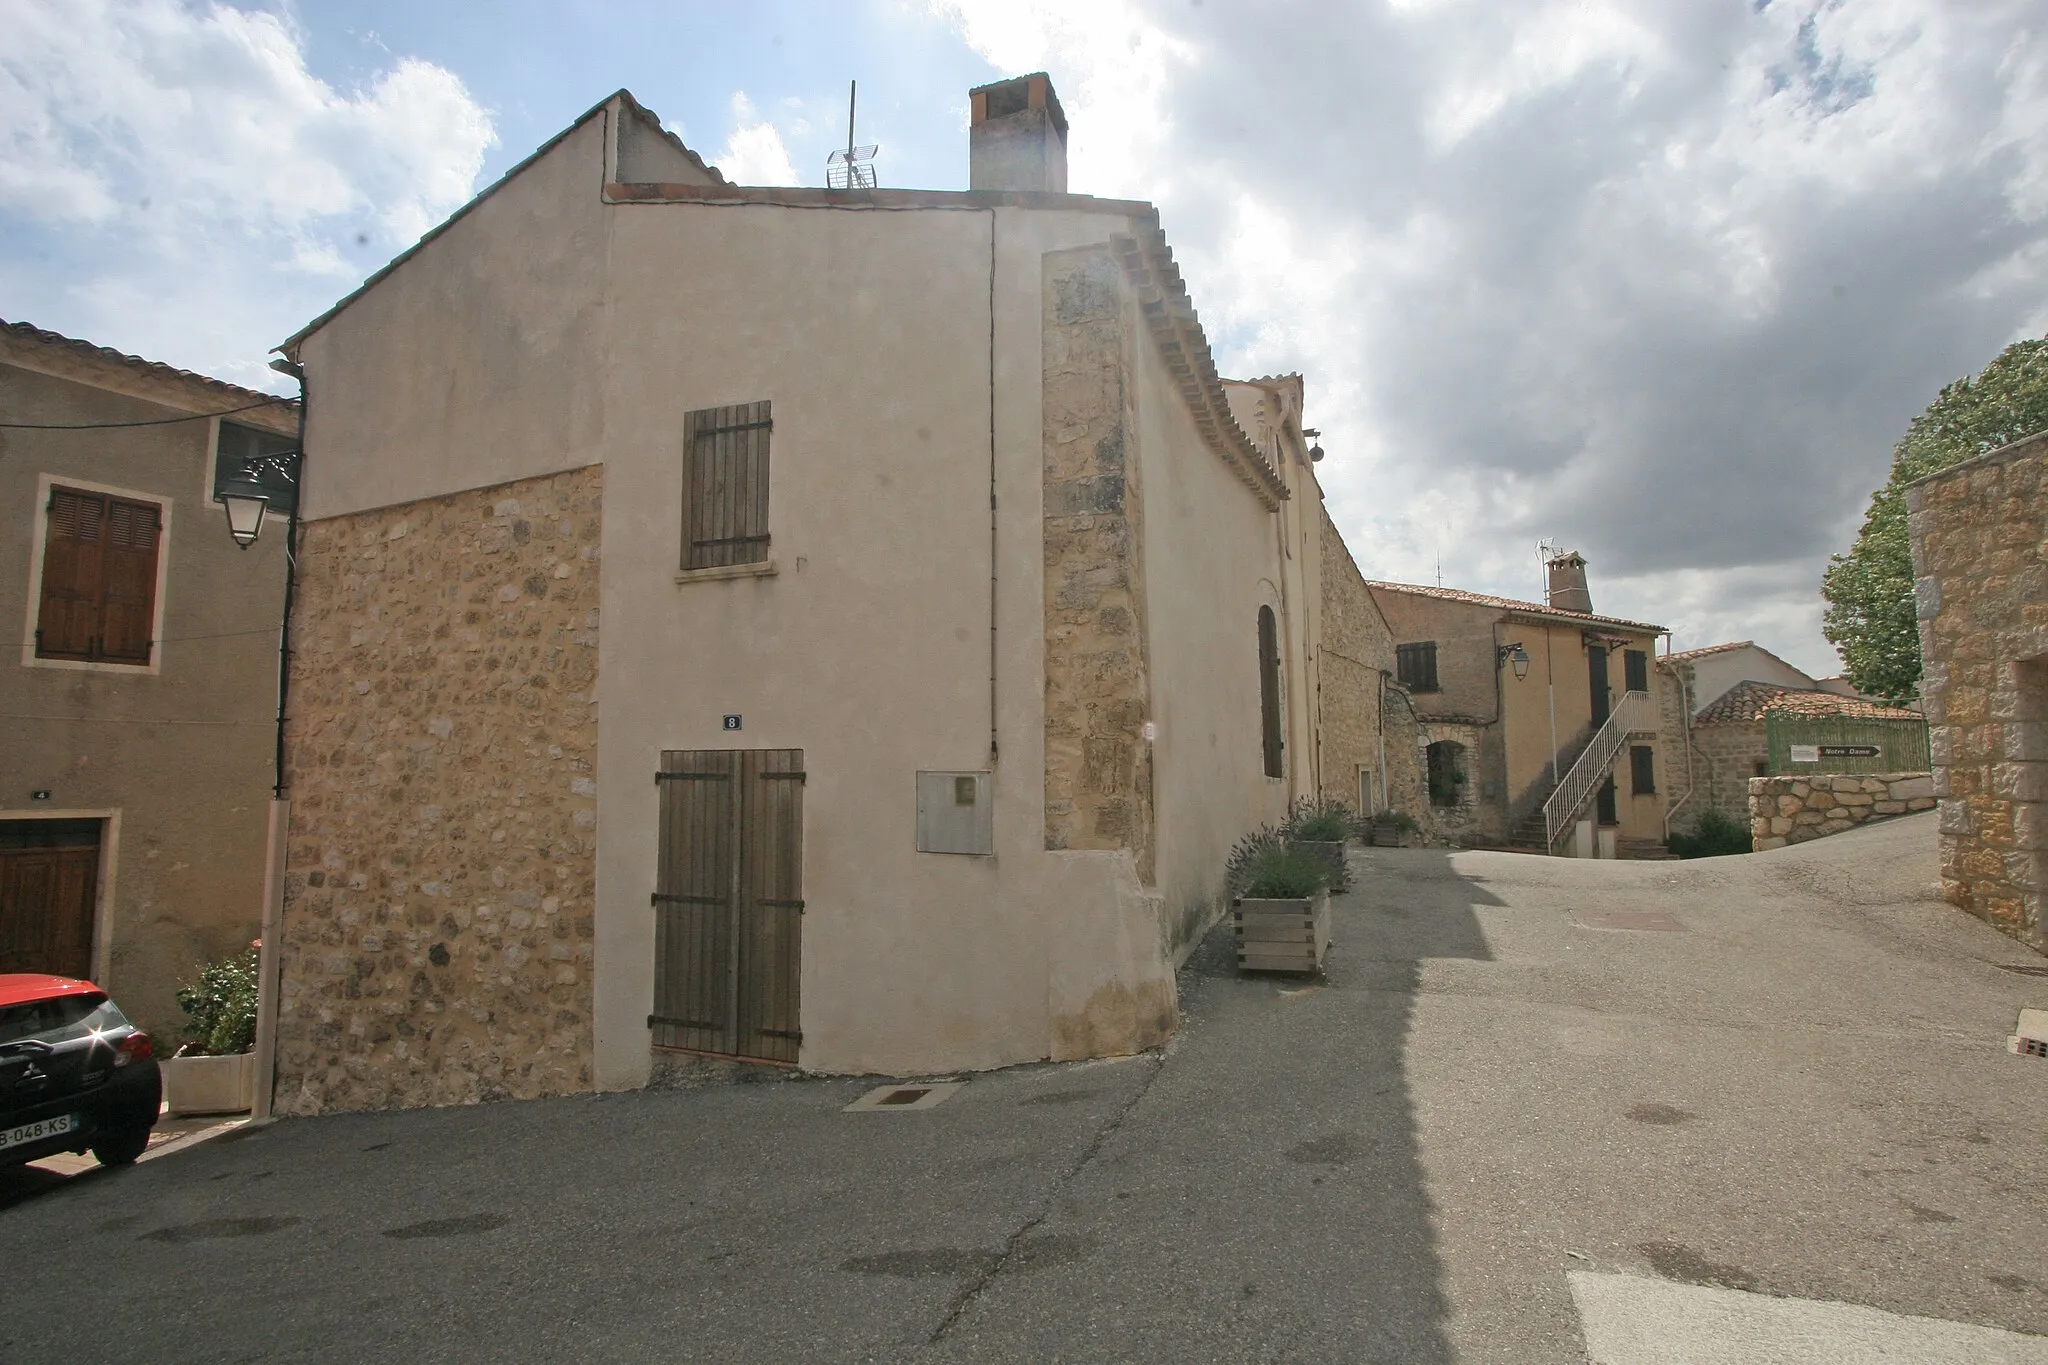 Photo showing: aisles in Baudinard-sur-Verdon
Camera location 43° 42′ 59.92″ N, 6° 08′ 05.56″ E View this and other nearby images on: OpenStreetMap 43.716644;    6.134877